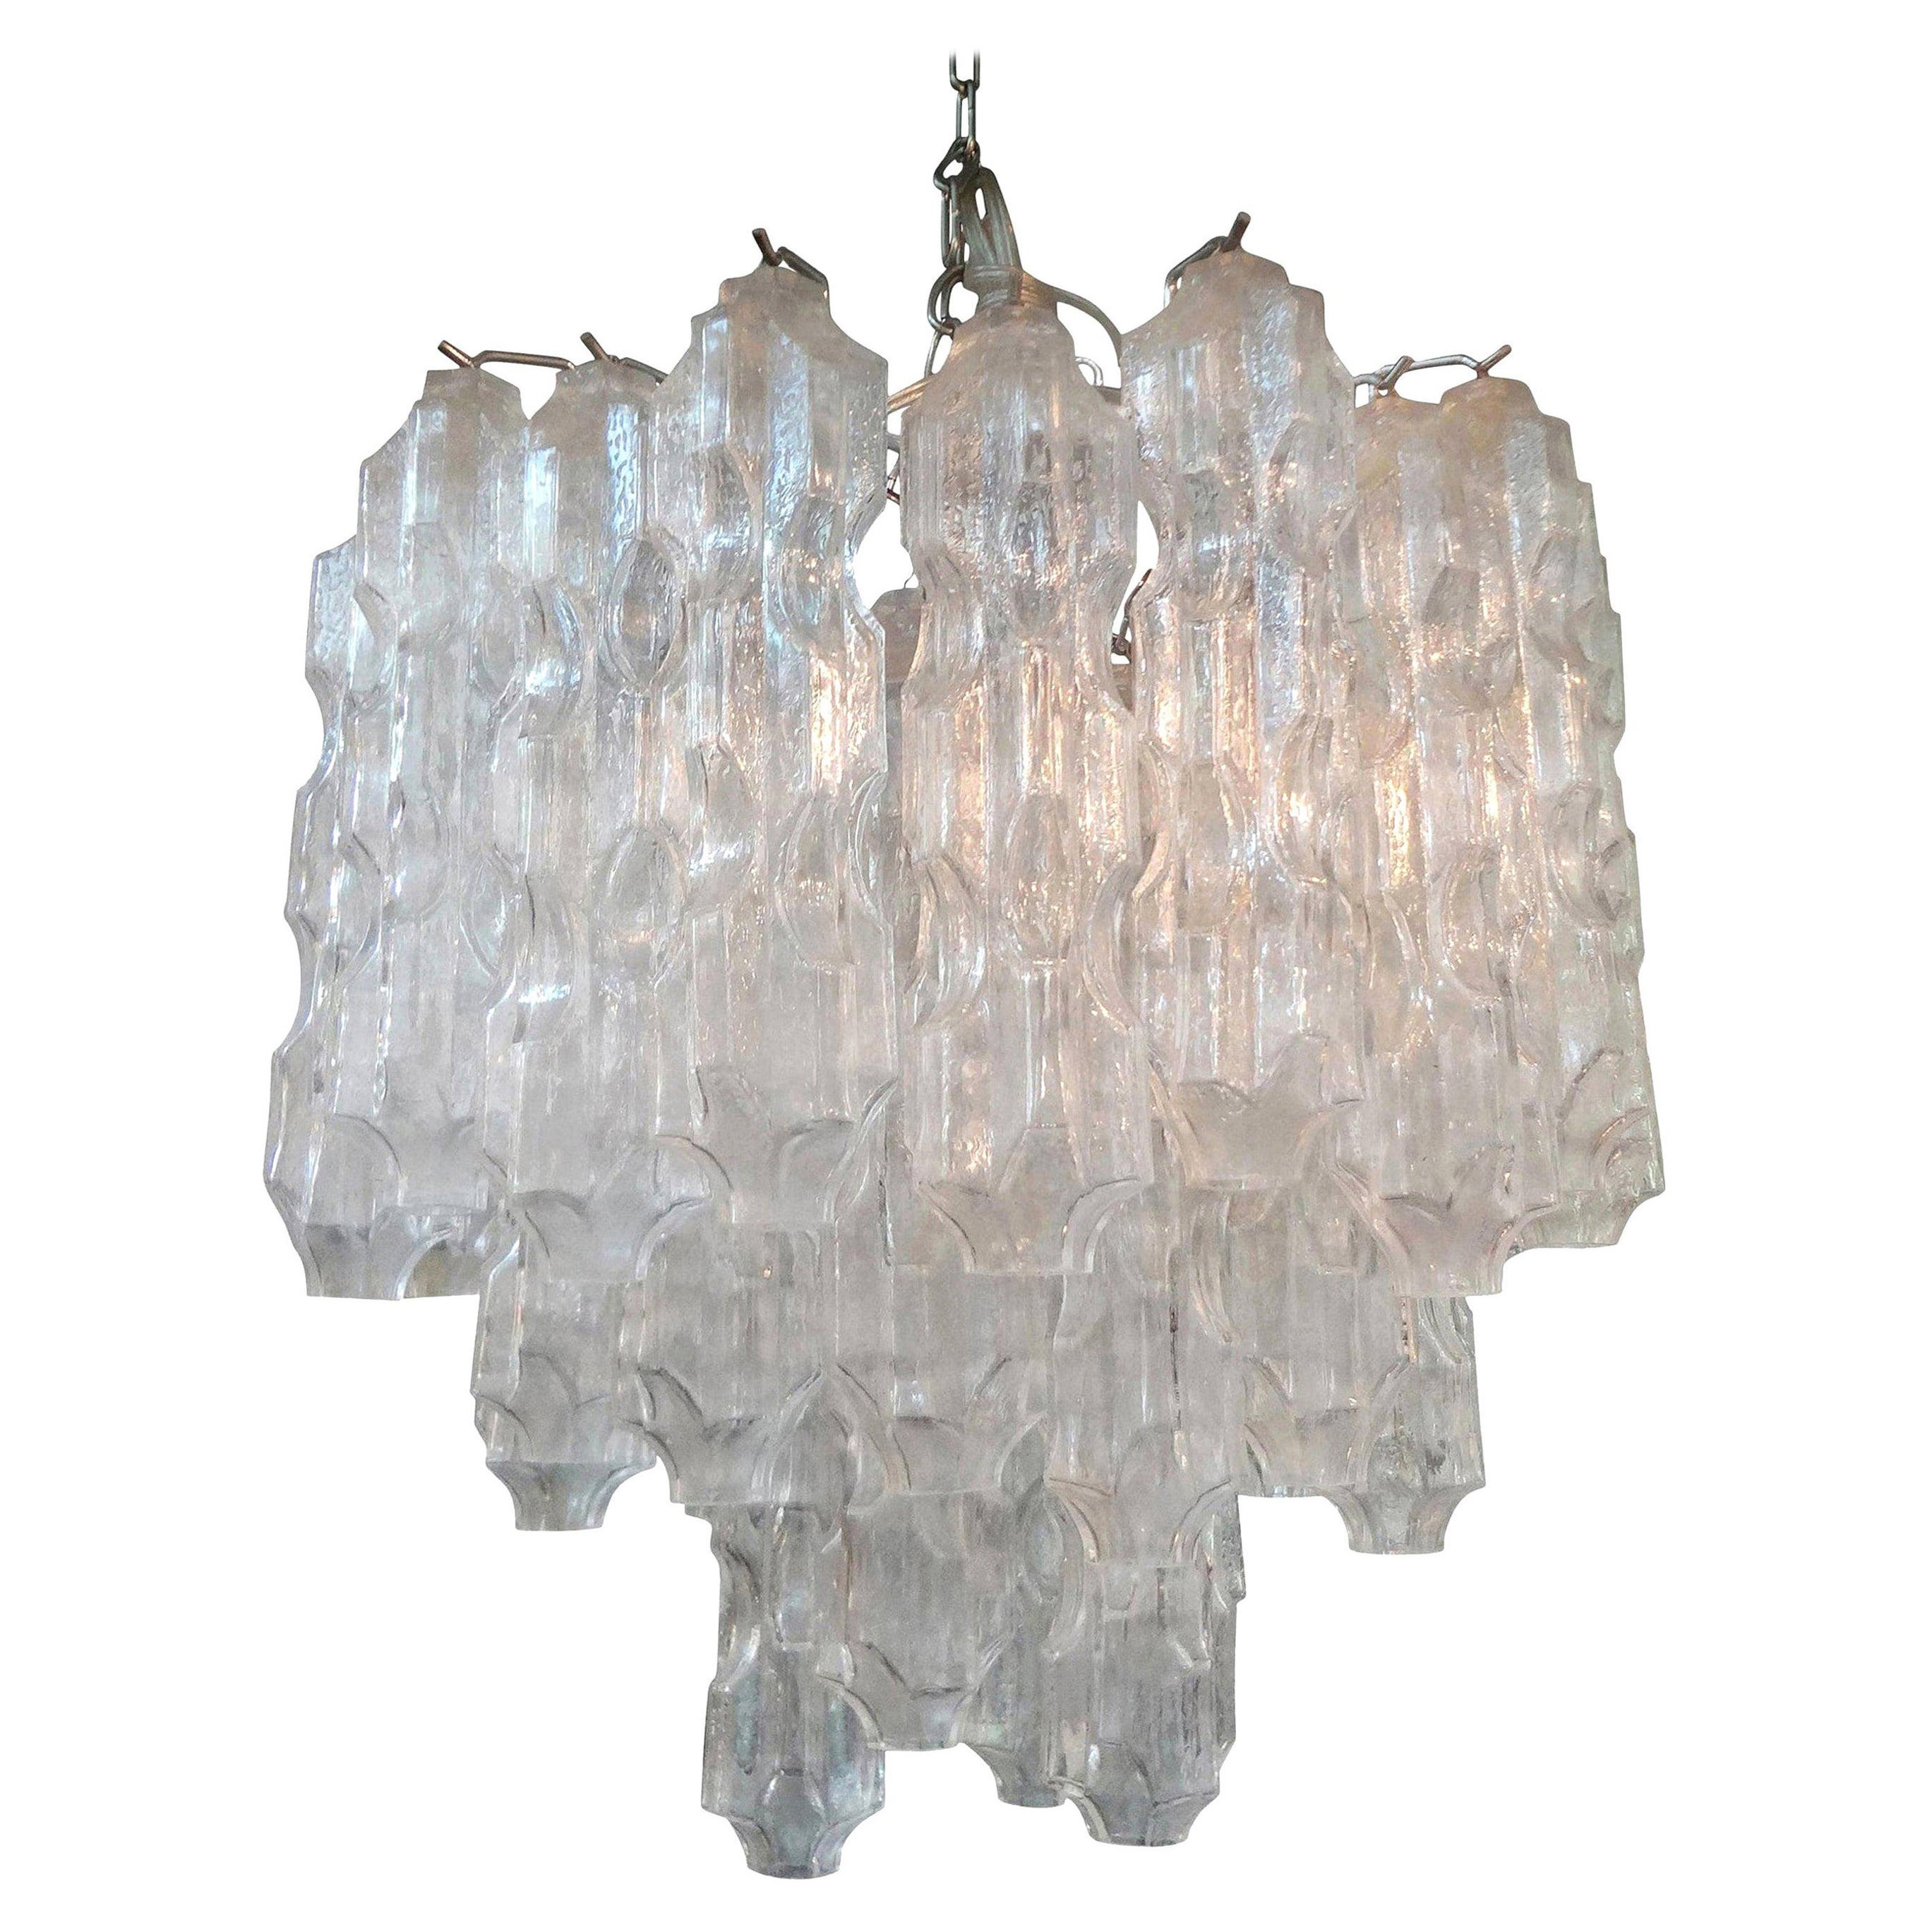 Midcentury Murano Chandelier Attributed to Toni Zuccheri for Venini For Sale